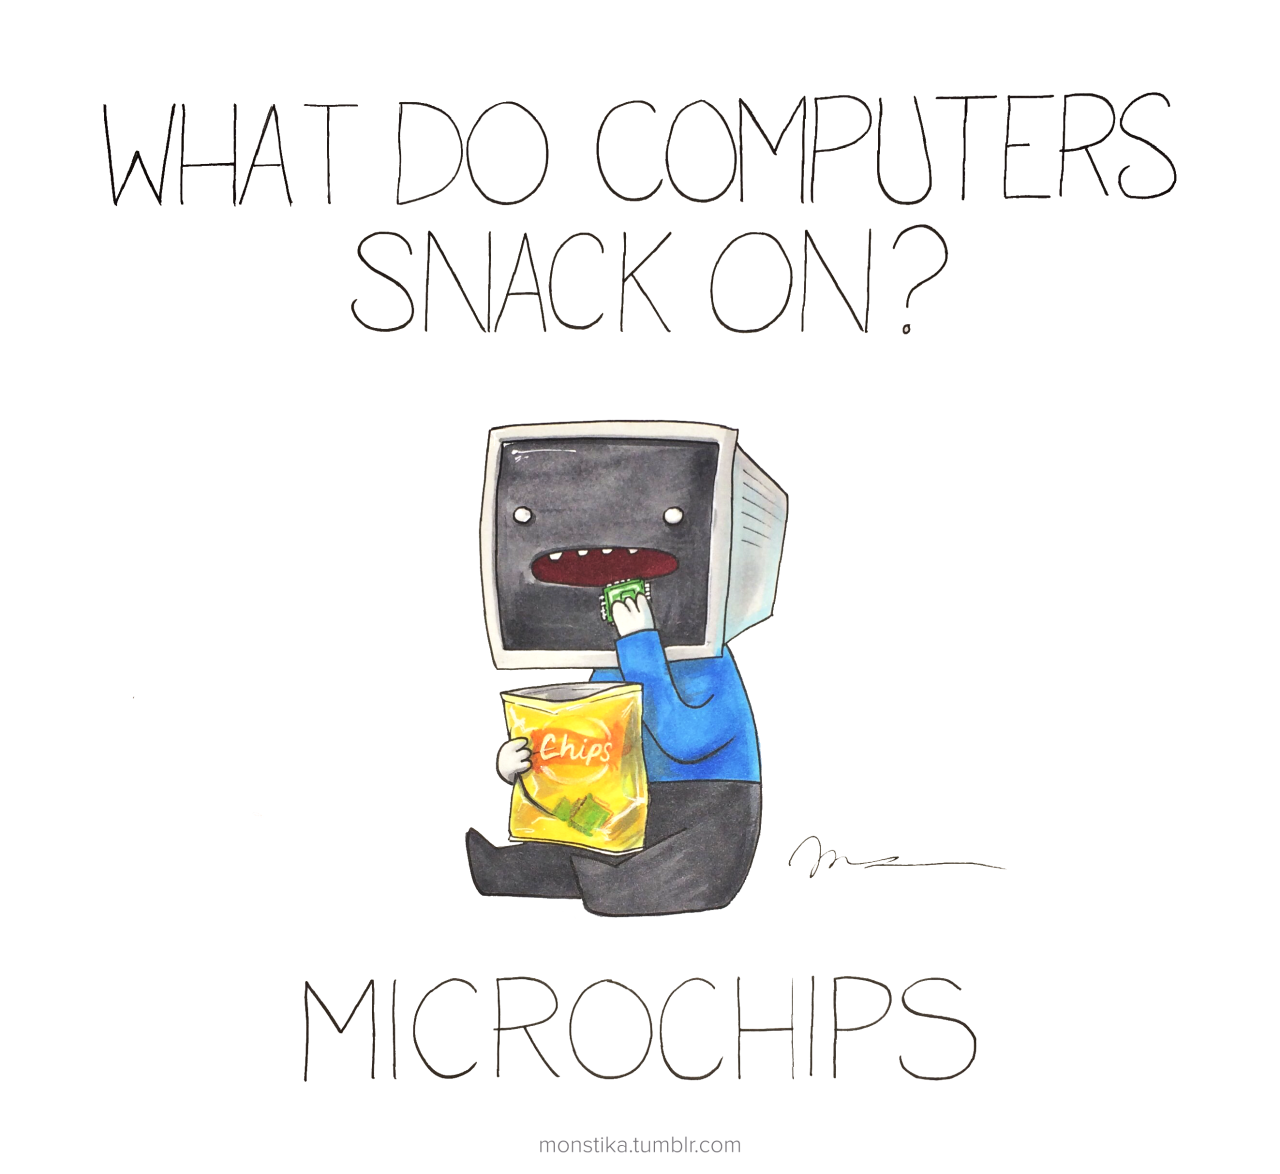 What computers snack on?